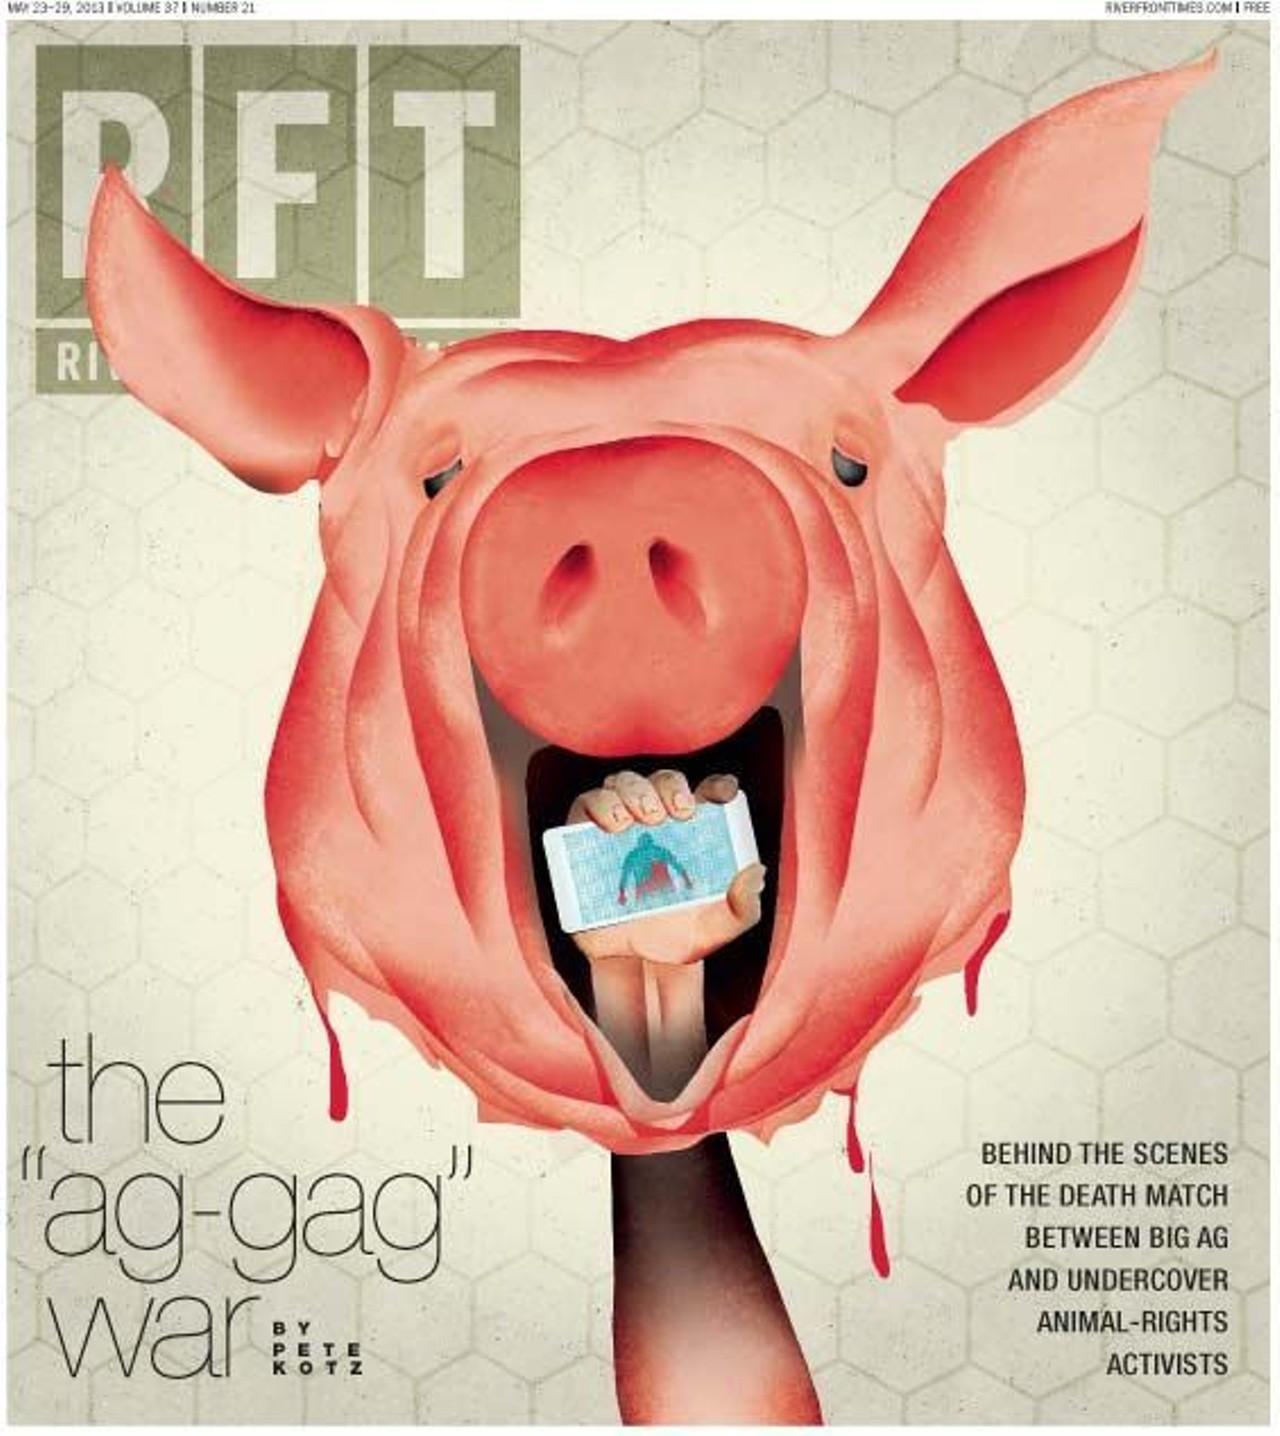 May 23
Illustration by Brian Stauffer. Read "The Ag-Gag War."